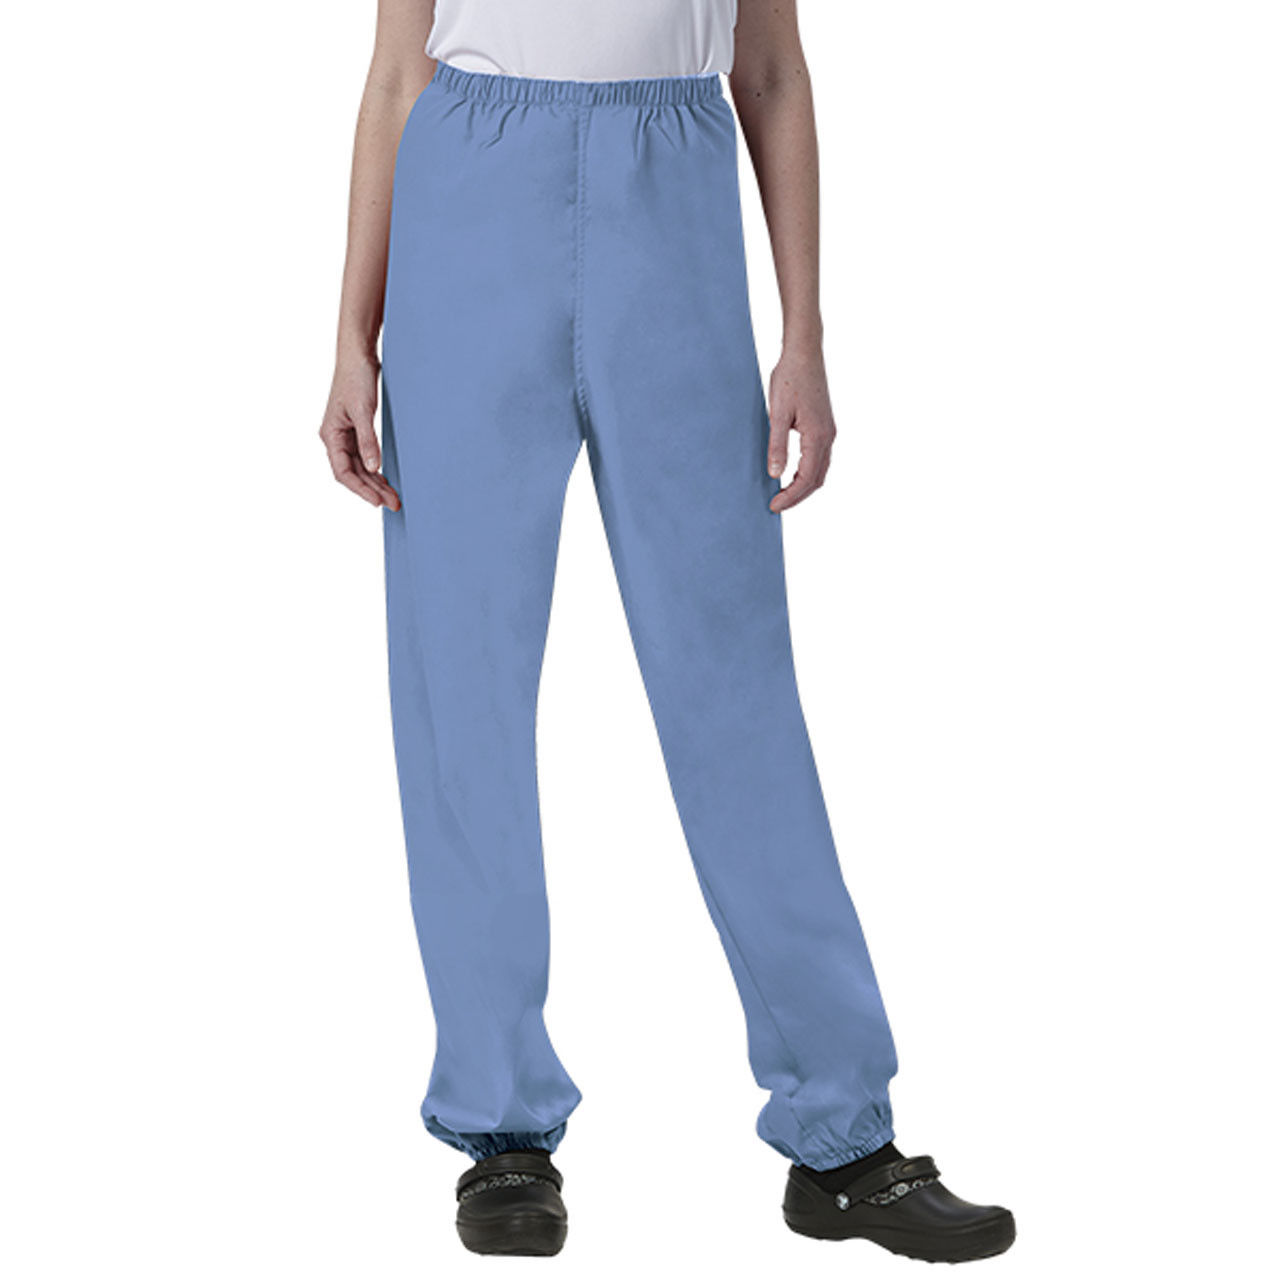 Are these polyester elastic waistband pants reversible?